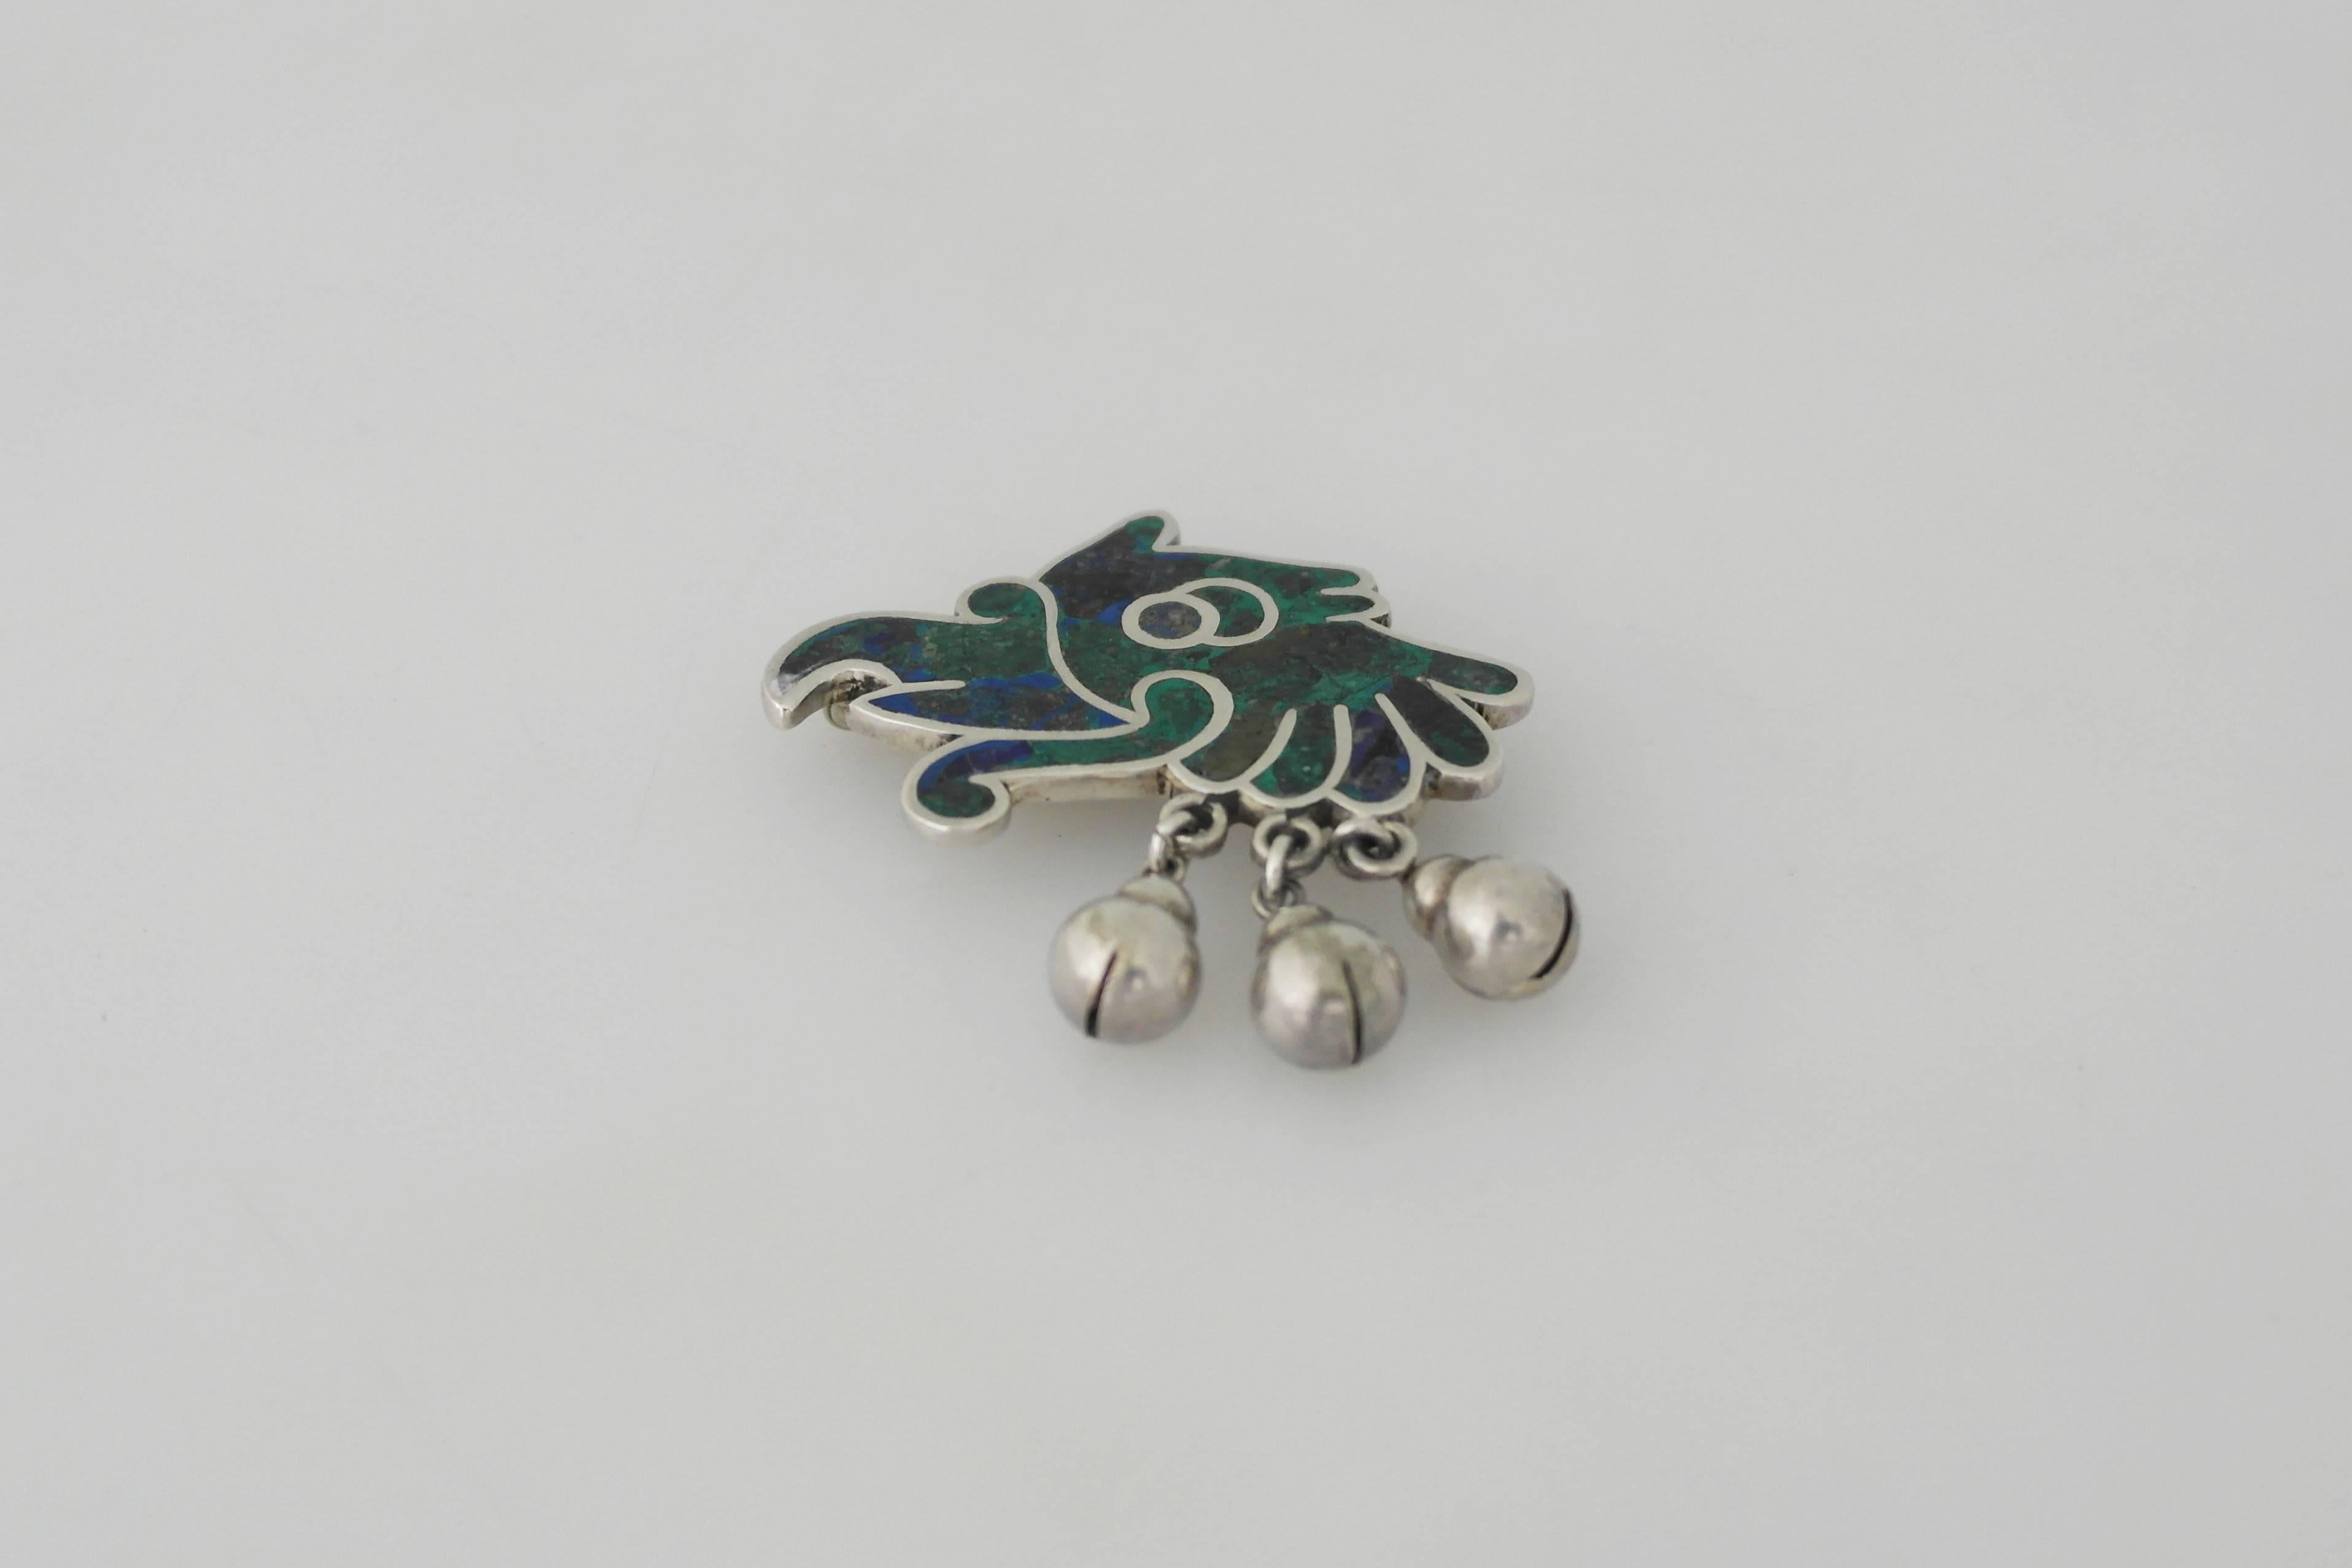 Being offered is a sterling silver brooch made by Los Castillo of Taxco, Mexico. Comprising a parrot motif with azur malachite stone inlay; three dangling bells. Dimensions: 1 1/2 inches x 1 3/4 inches. Marked as illustrated. In excellent condition.